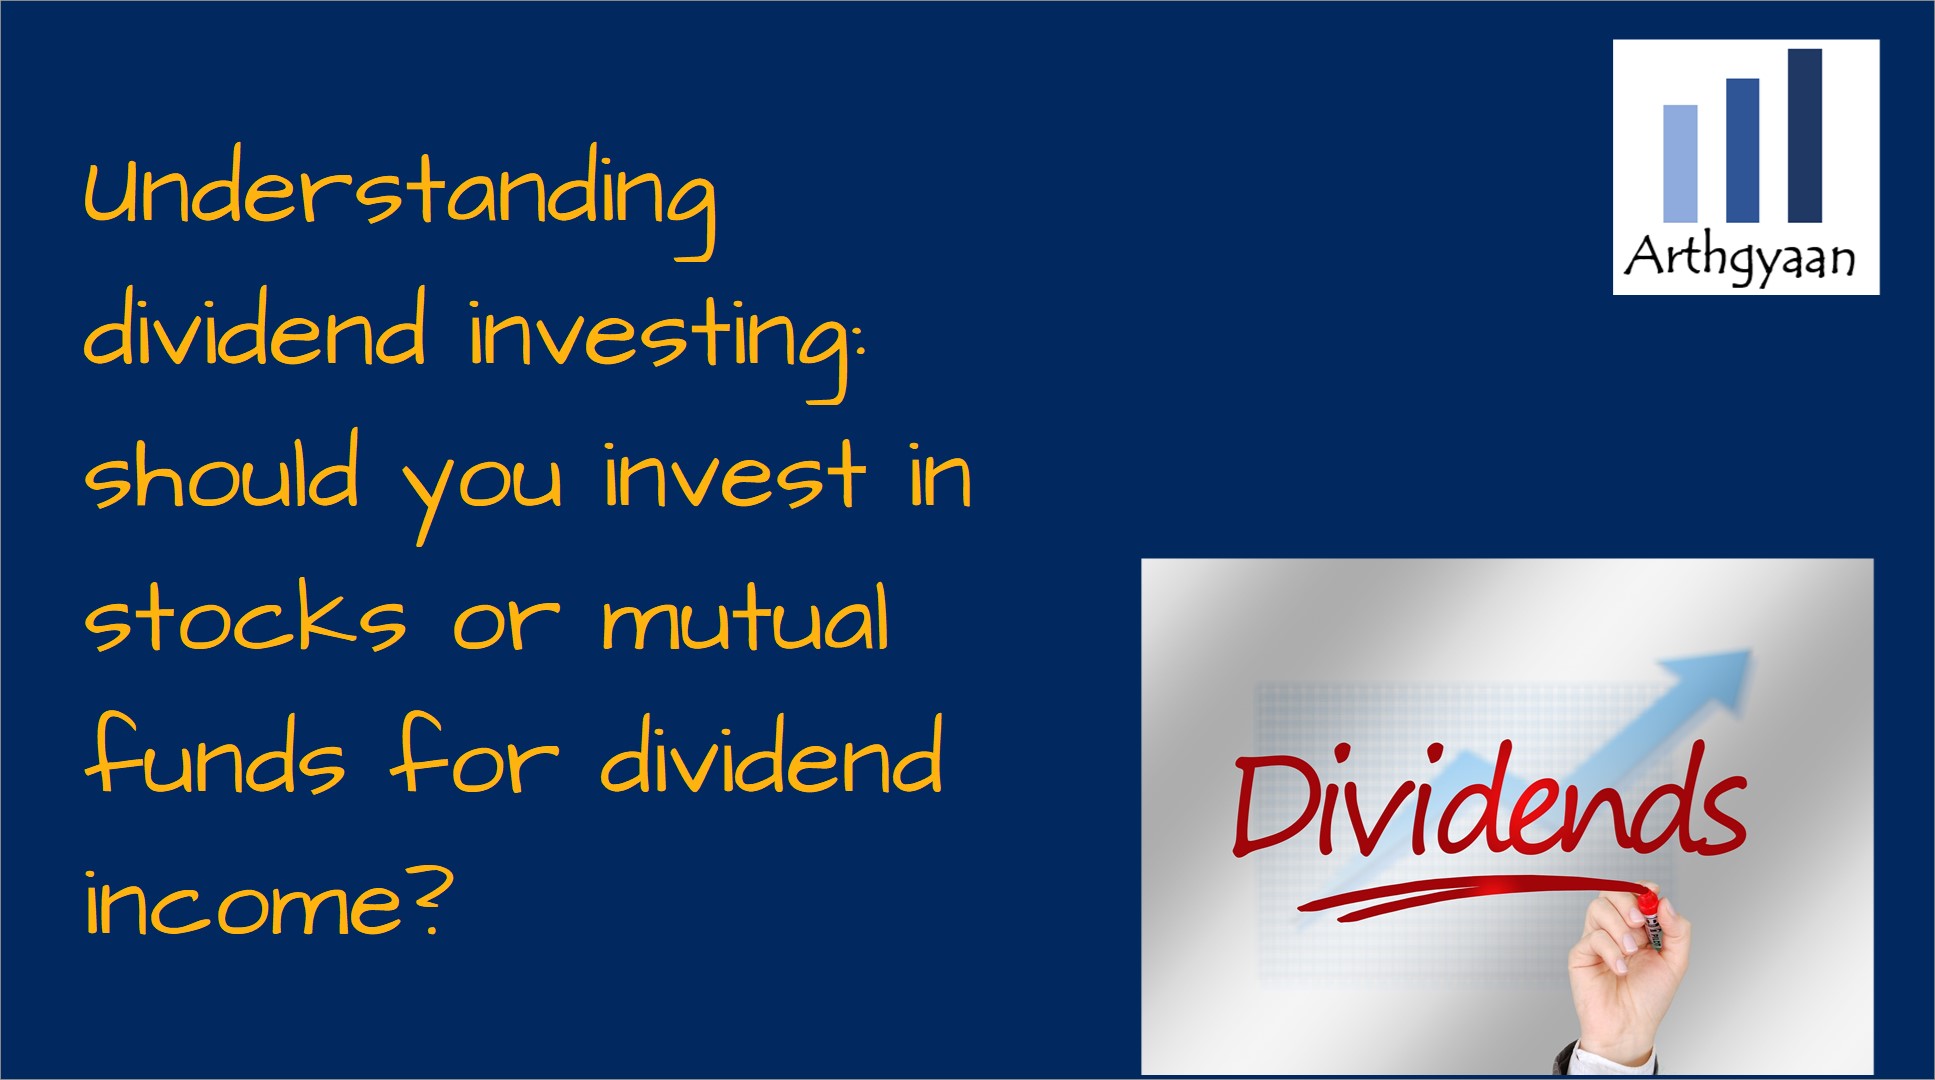 <p>This article explains the concept of dividends and shows which option is better for dividend income: stocks or mutual funds.</p>

